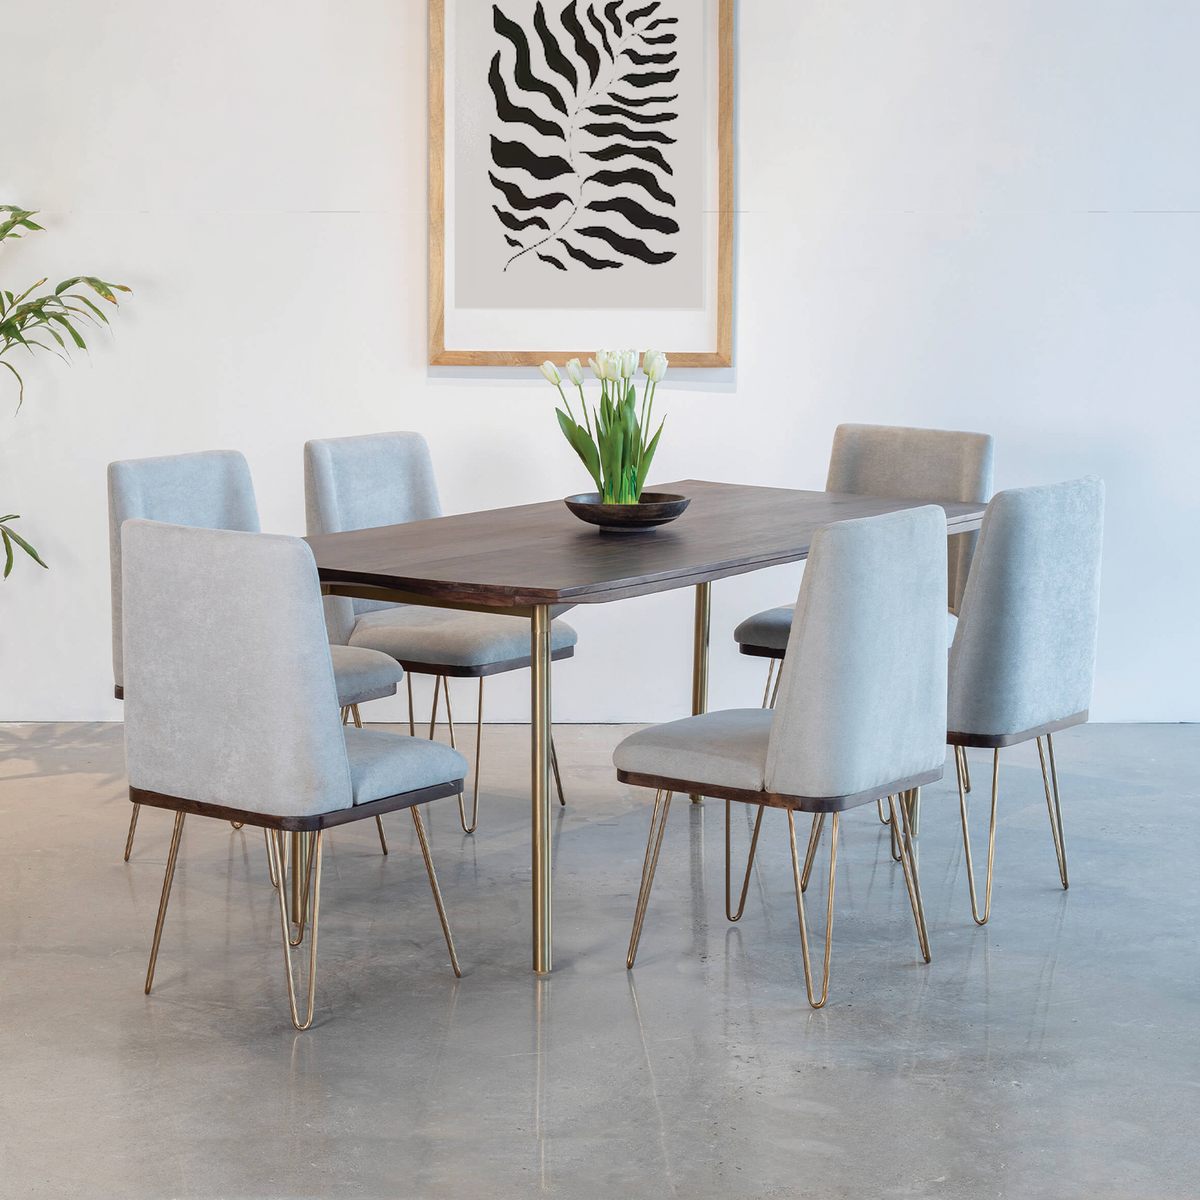 Barcelona Dining Table With 6 Without Arm Chairs